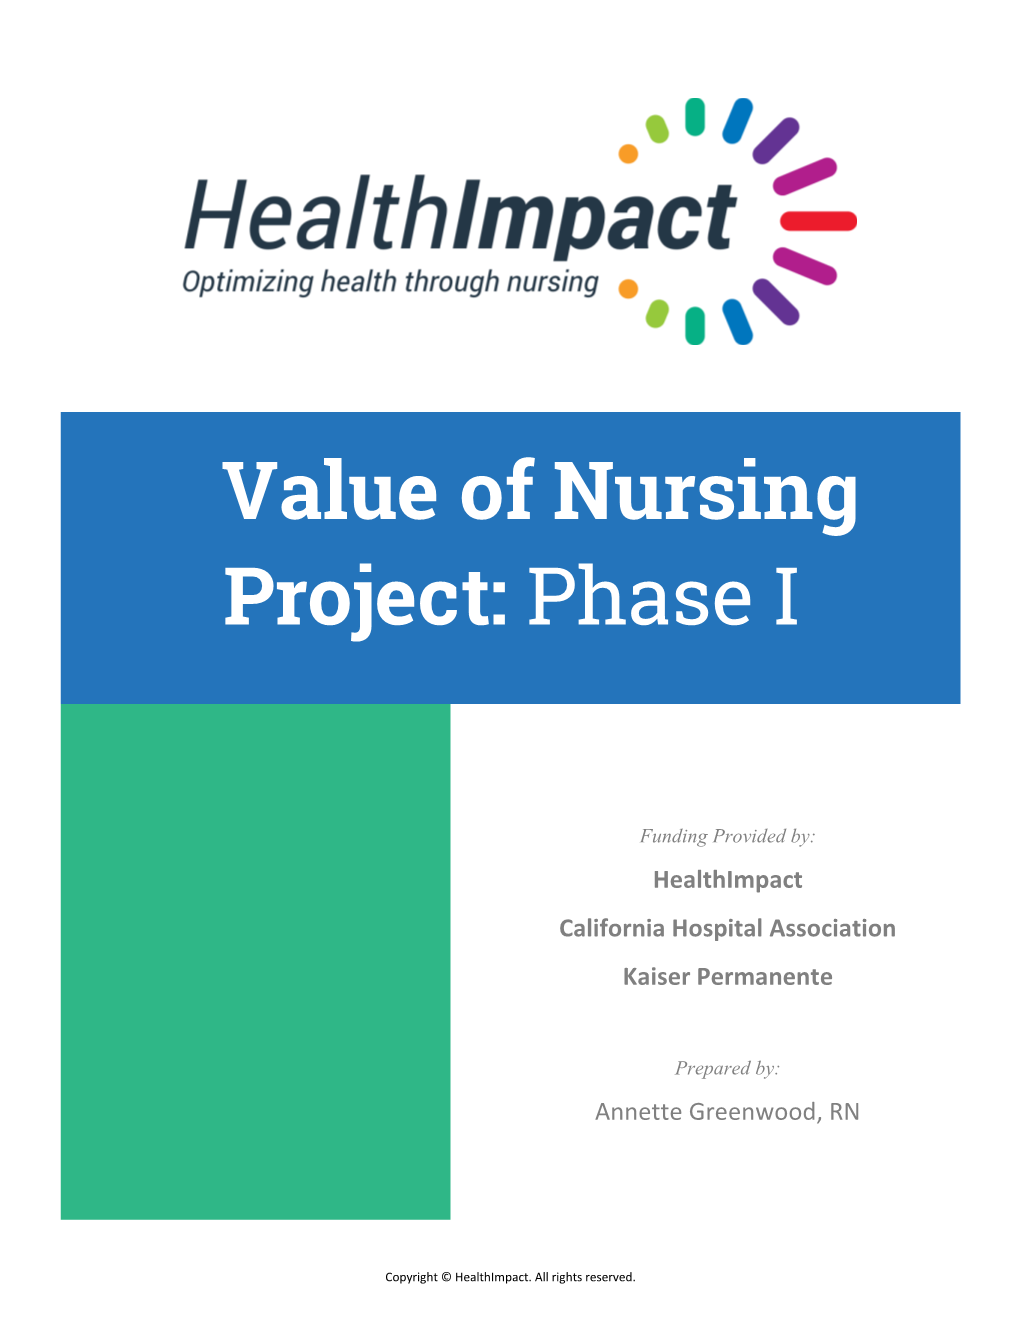 Value of Nursing Project, Phase I Release Date: February 2016